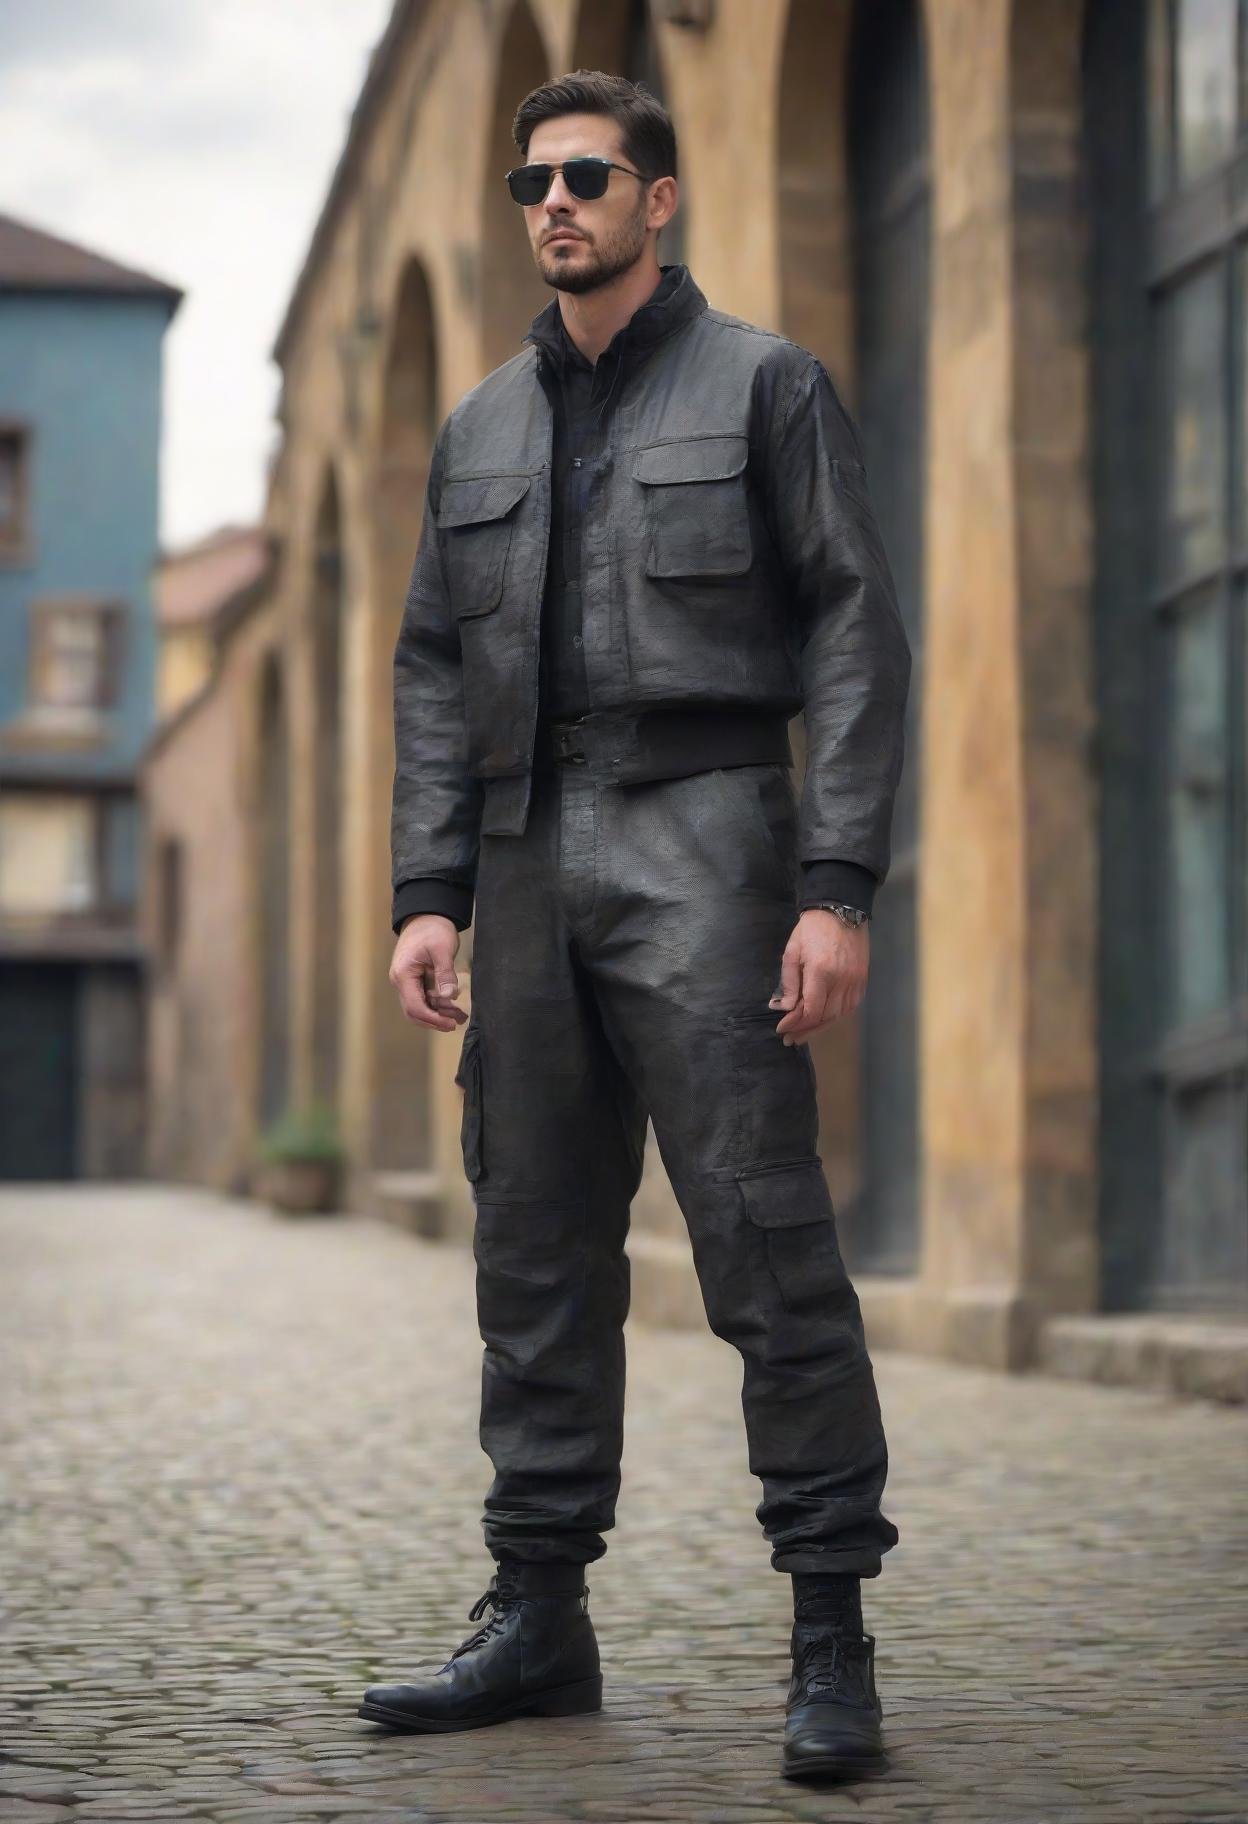 DonM1uth3rXL man,in front of a 3g3Kl0st3rXL portal,liquid metal texture    black ar-embedded cargo pants, neural interface leather robotic work jacket, levitating sandals,         <lora:myLora\DonM1uth3rXL-000008><lora:myLora\3g3Kl0st3rXL-000006:0.6>,